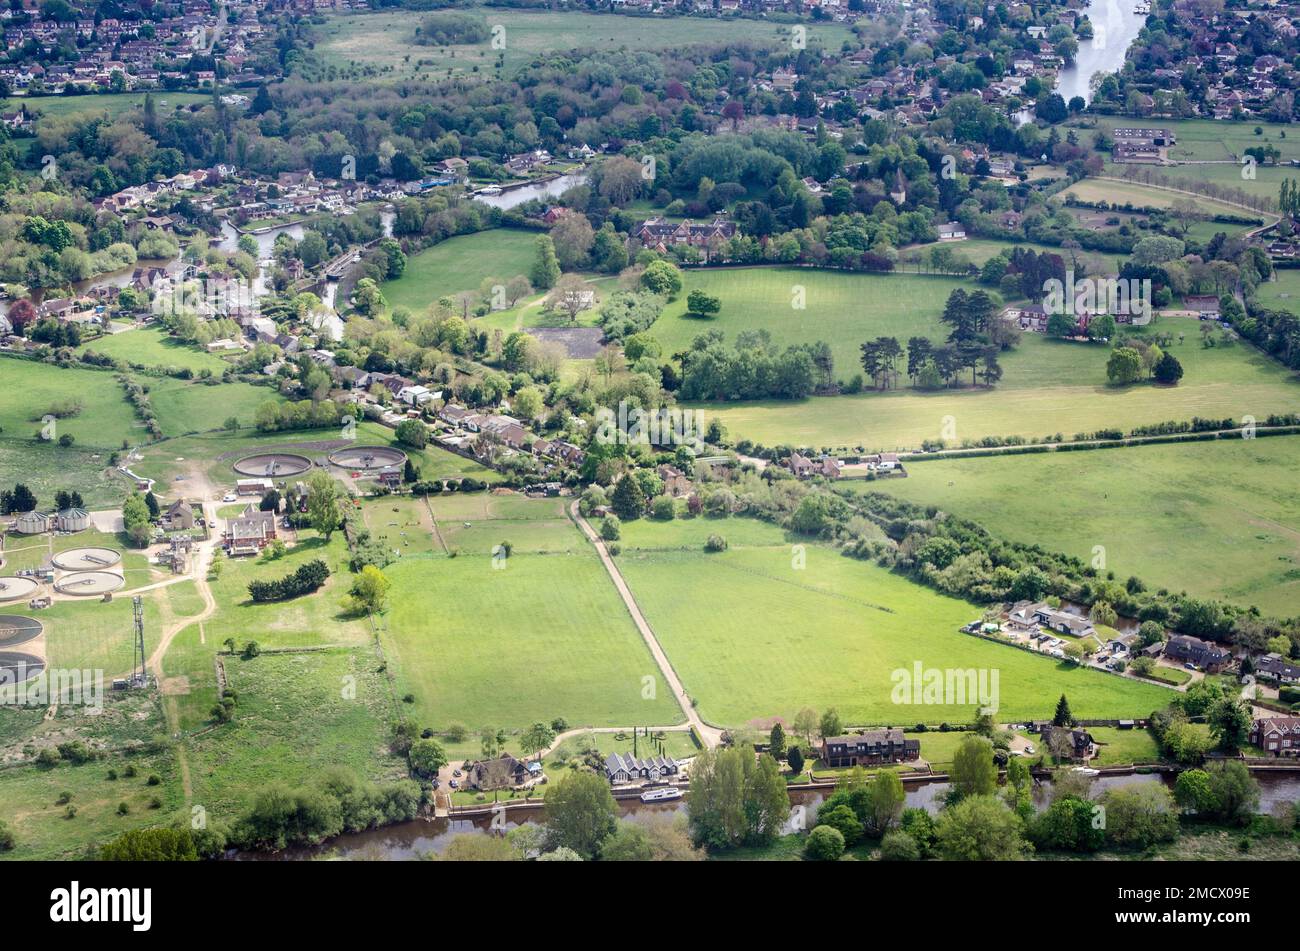 Aerial view of the Thames Water sewage treatment works at Ham Island in Old Windsor, Berkshire.  The water treatment site is on a bend of the River Th Stock Photo